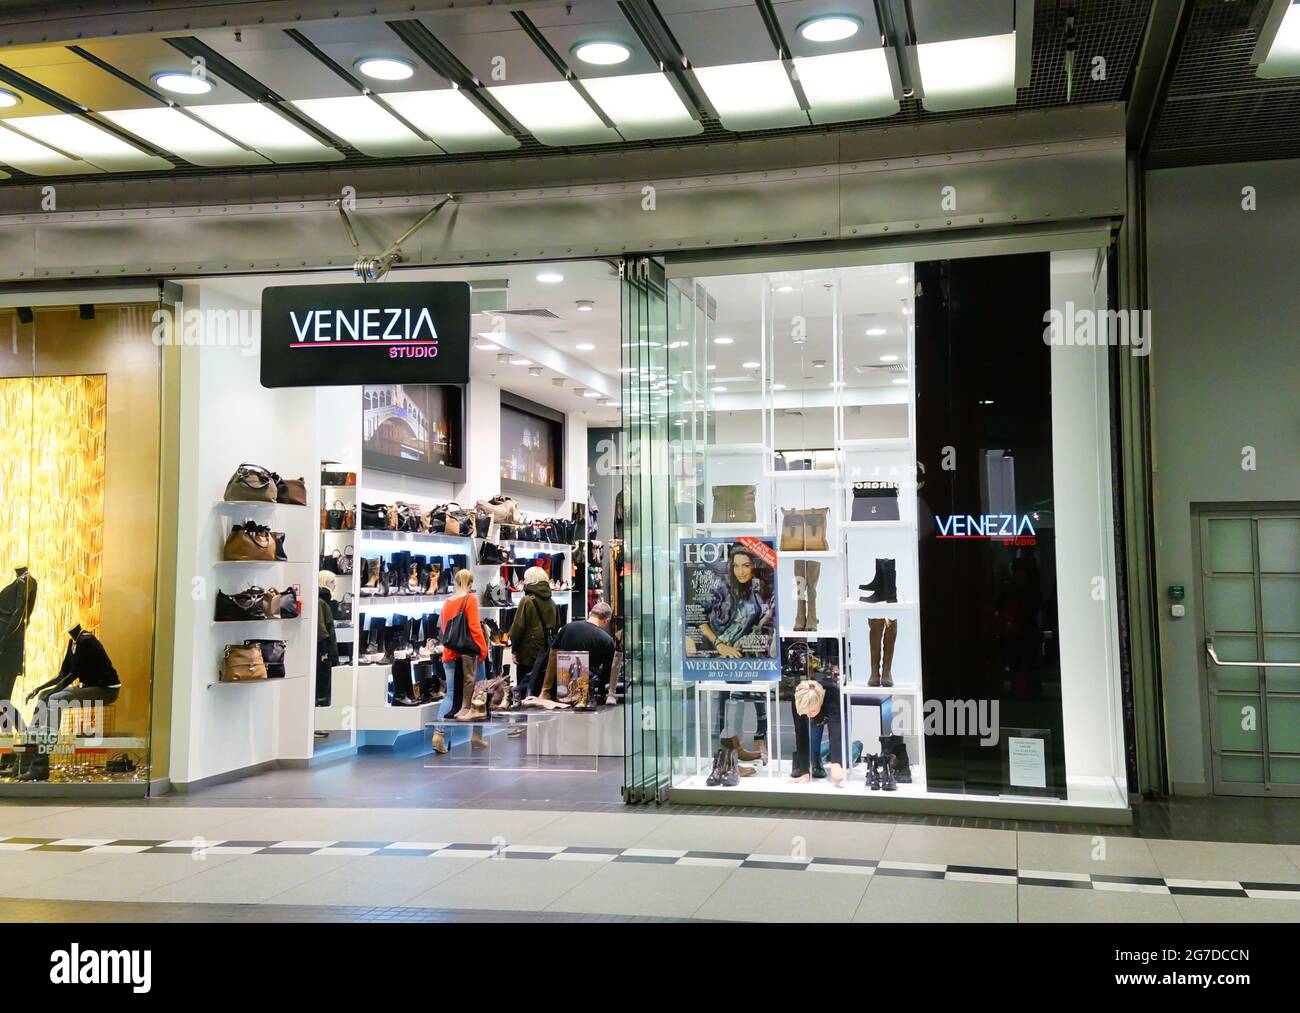 POZNAN, POLAND - Oct 12, 2016: The front entrance of a Venezia shoe store in the Stary Browar shopping mall Stock Photo